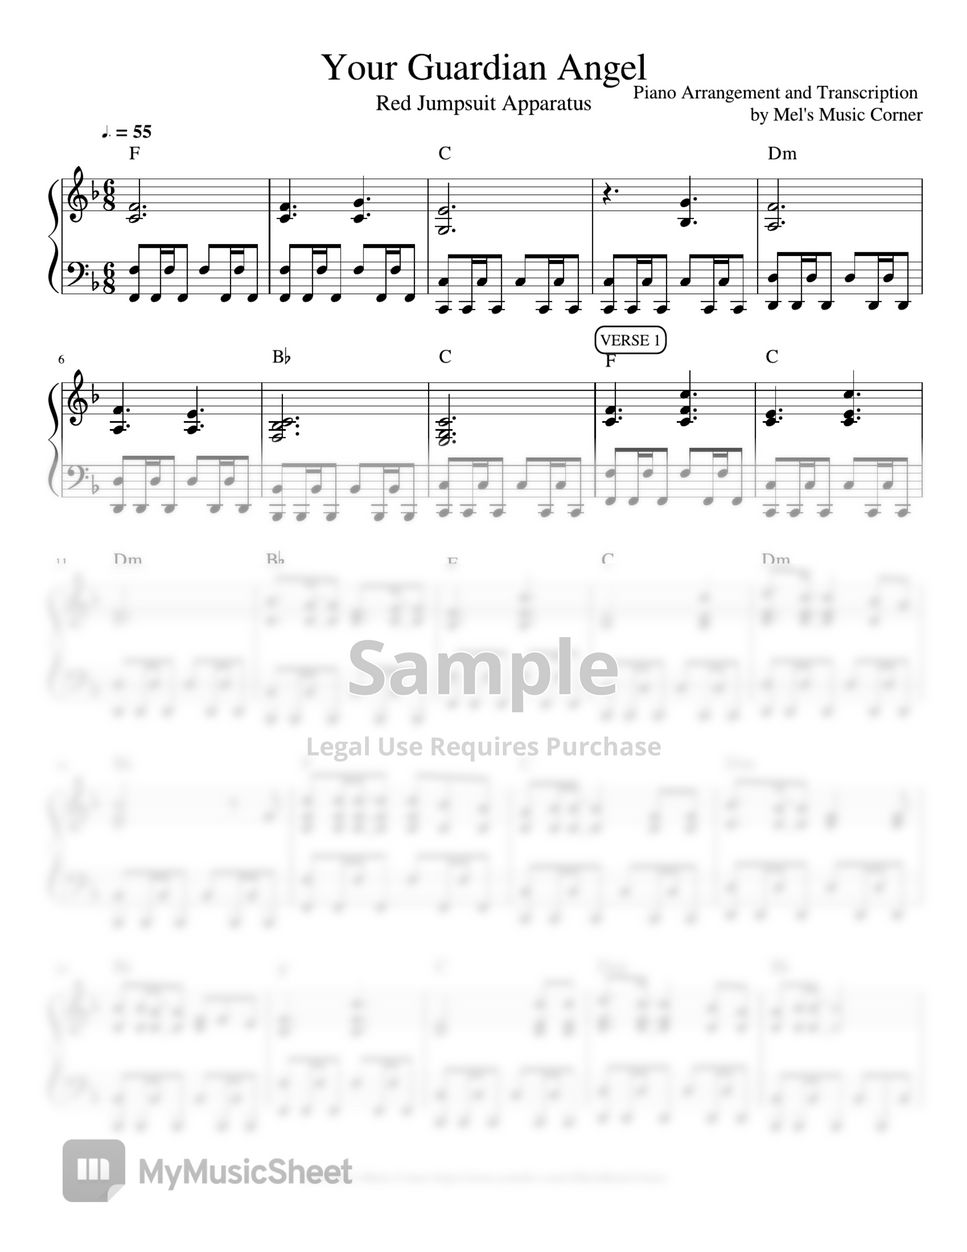 Red Jumpsuit Apparatus - Your Guardian Angel (piano sheet music) by Mel's Music Corner